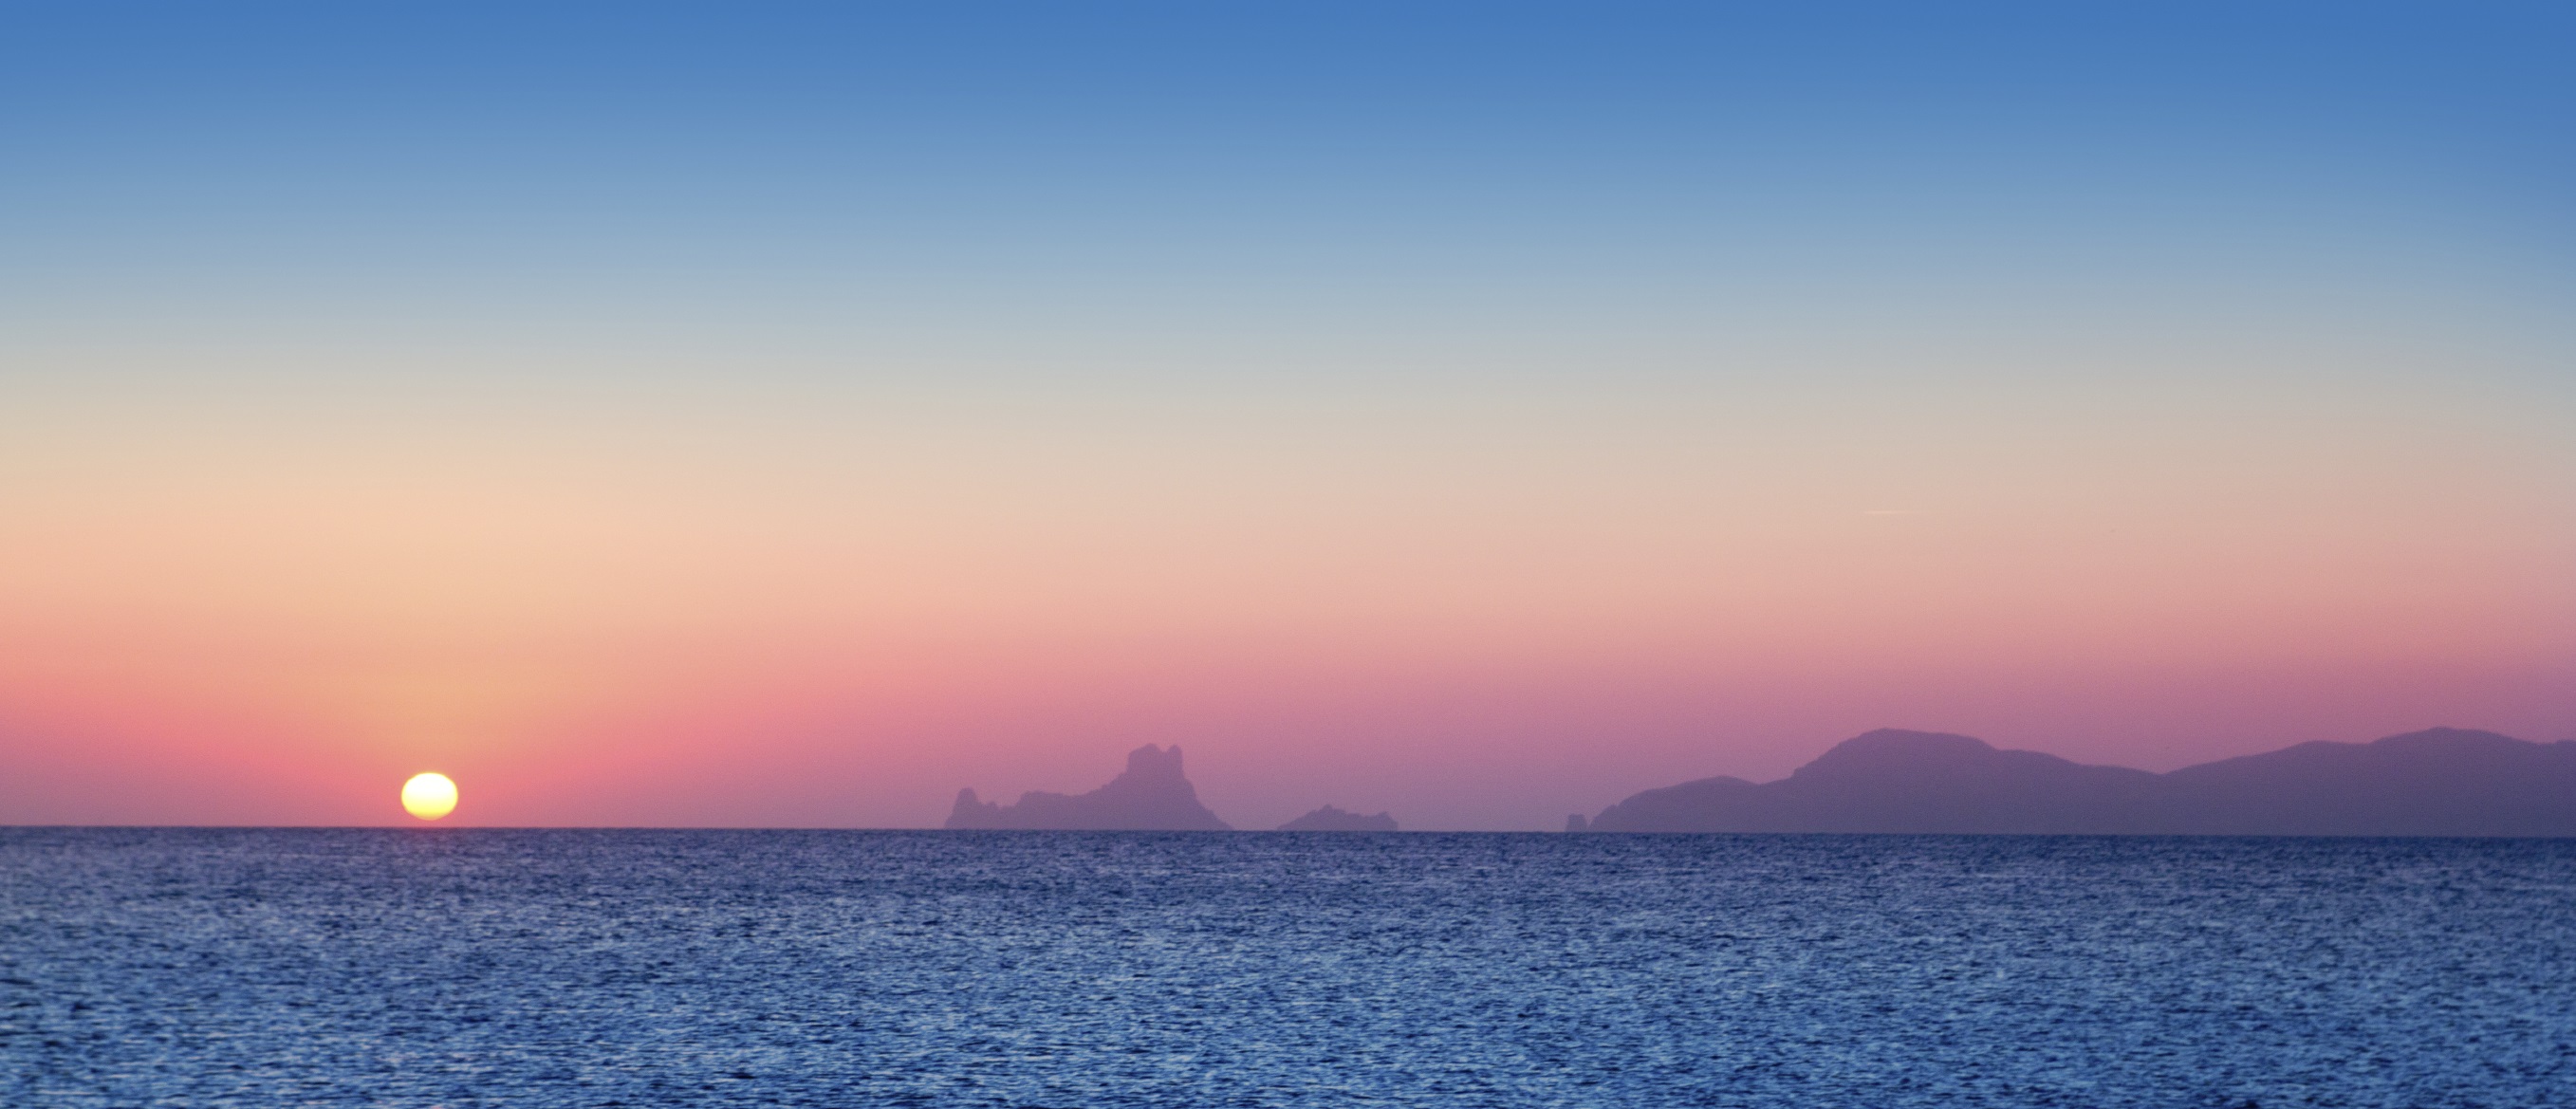 7 Awesome Spots to Watch the Sunset in Ibiza - Into the Blue ...